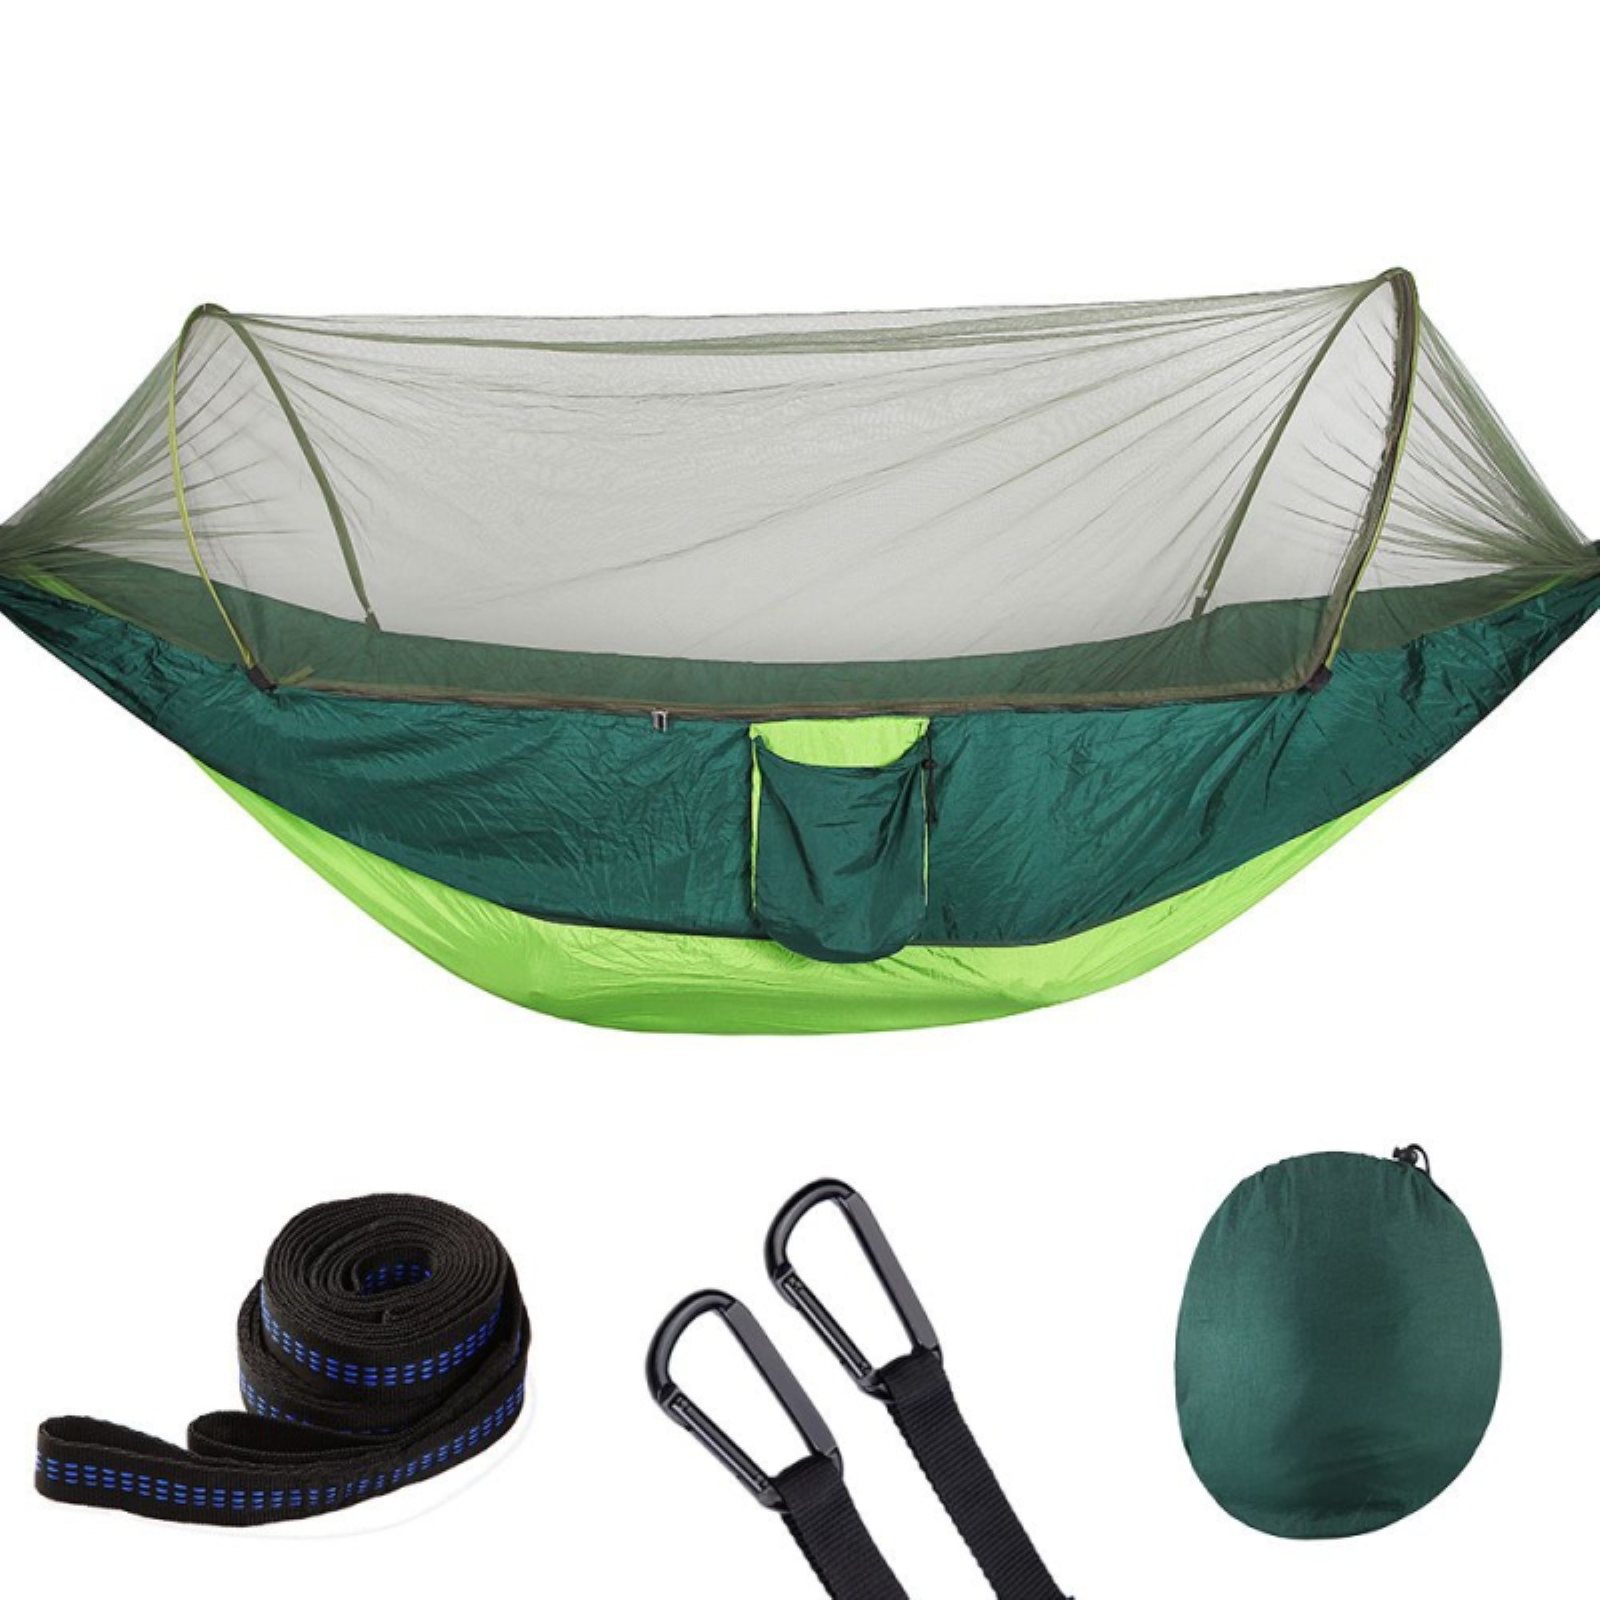 Details about  / Double Camping Hammock with Mosquito Net Nylon Tent Hanging Bed Portable Outdoor